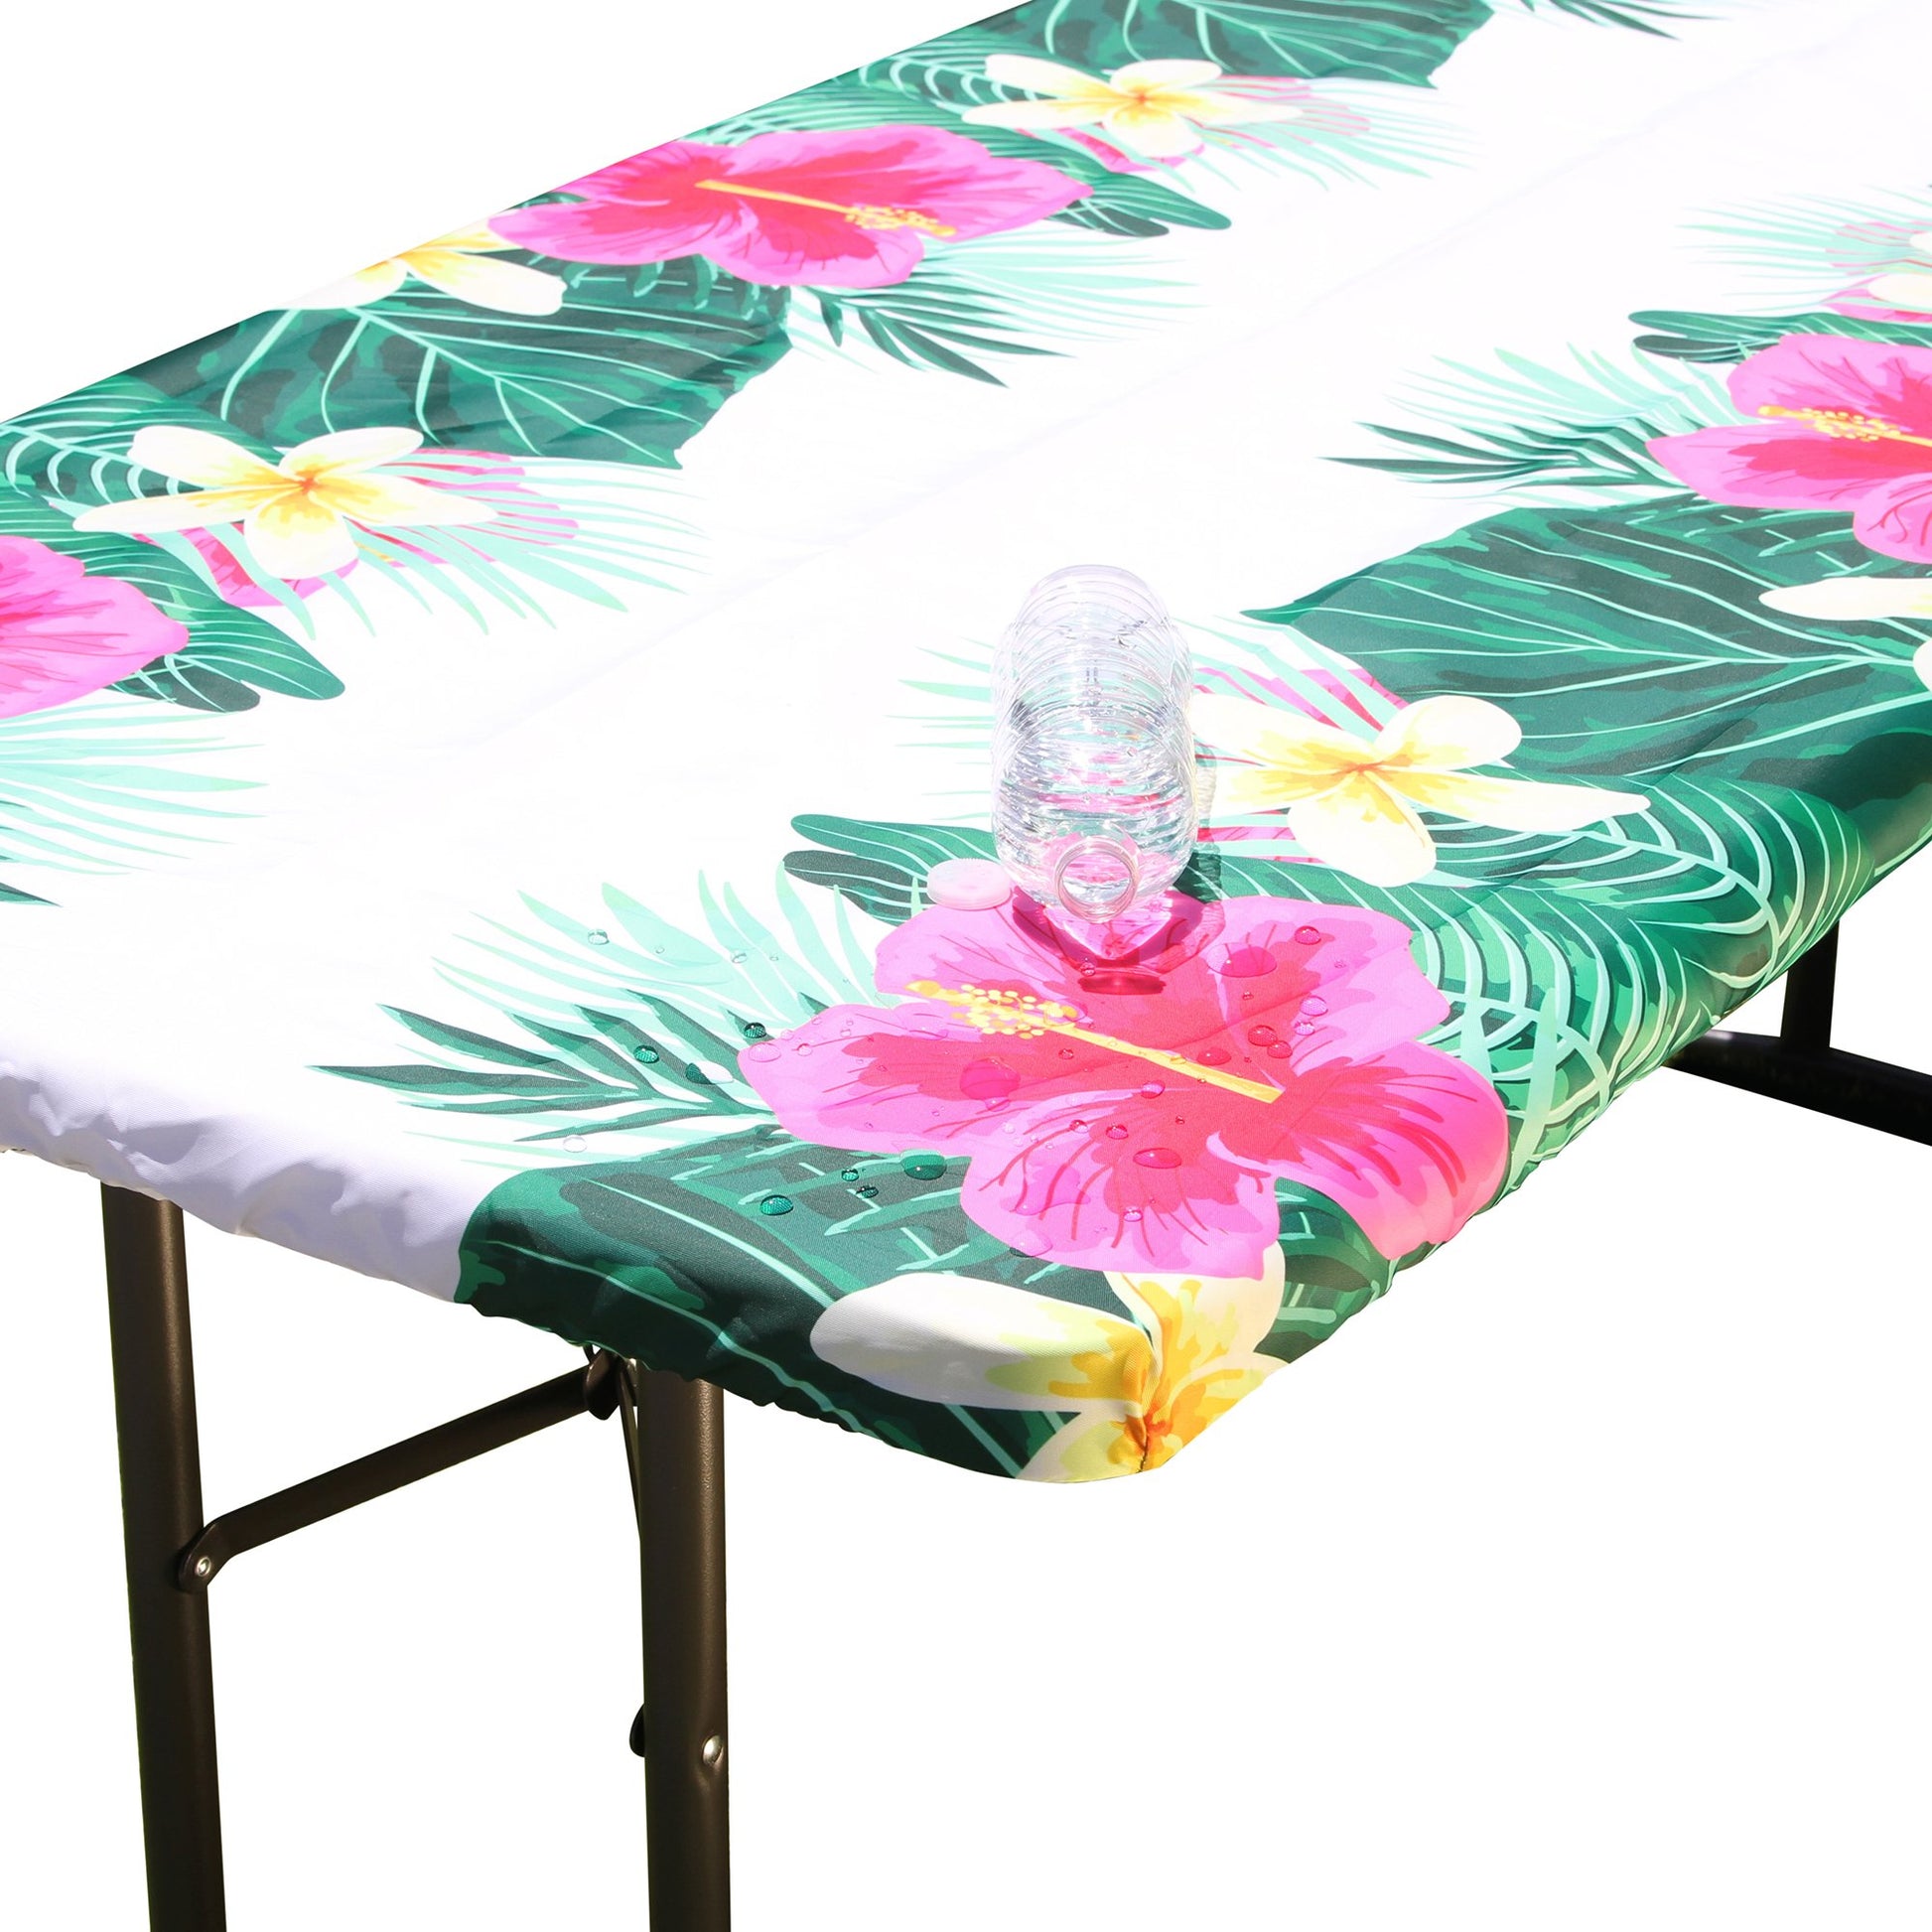 Water beading up on the water resistant surface of TableCloth PLUS 72" Summer Fitted Polyester Tablecloth for 6' Folding Tables